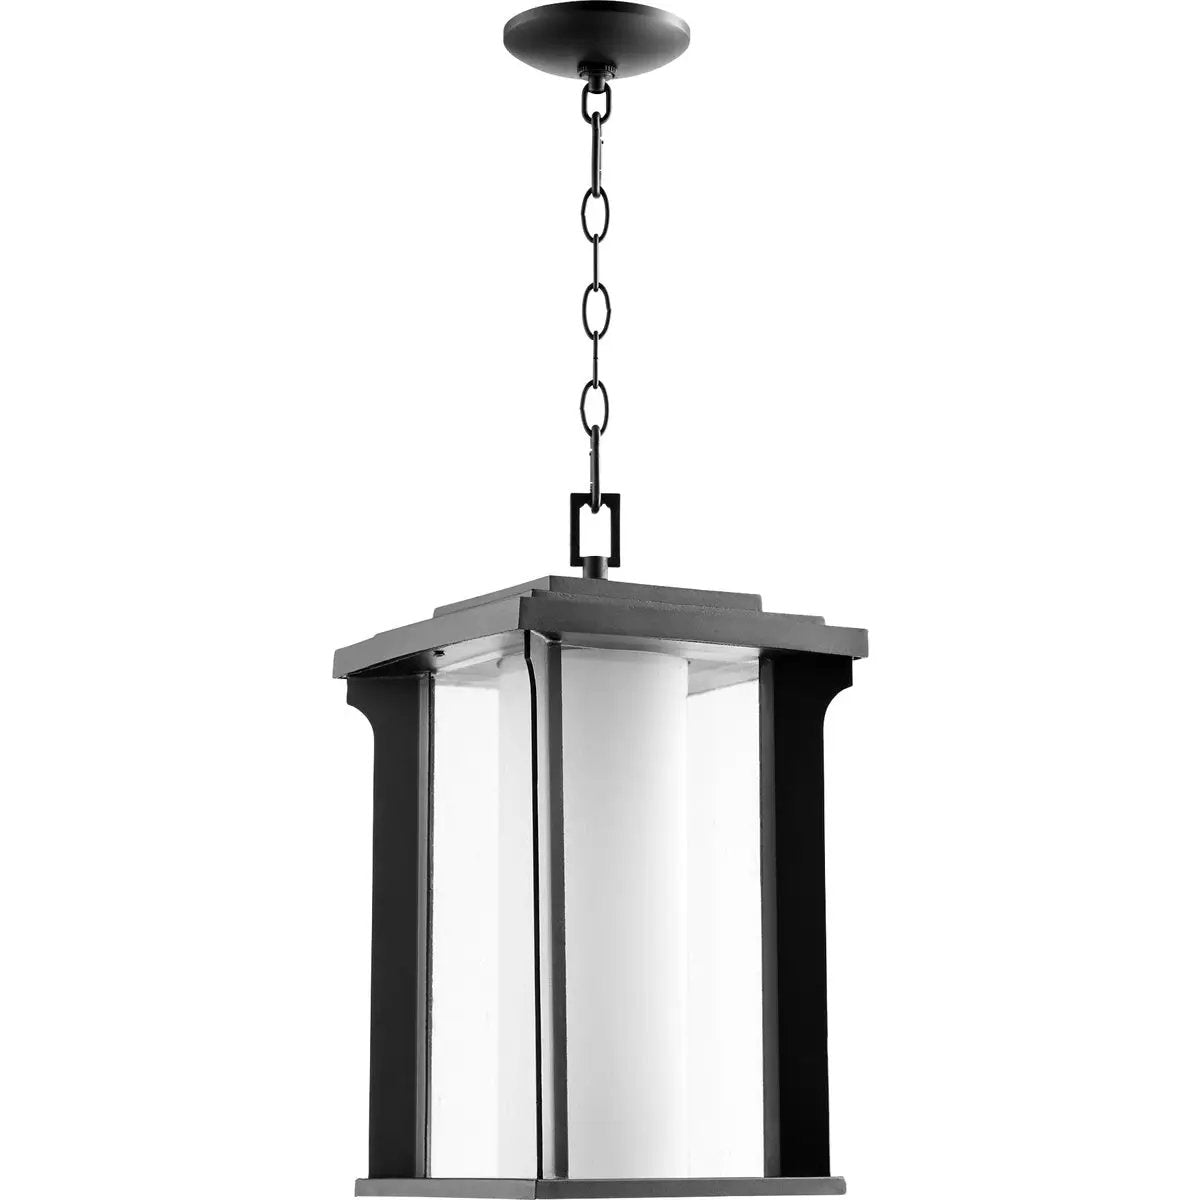 Transitional Outdoor Hanging Light with molded details and boxed design, crafted from metal with a noir finish. Features a satin opal glass cylinder diffuser for a nice ambient glow. UL Listed for wet locations. Dimensions: 10&quot;W x 16&quot;H. 2-year warranty.